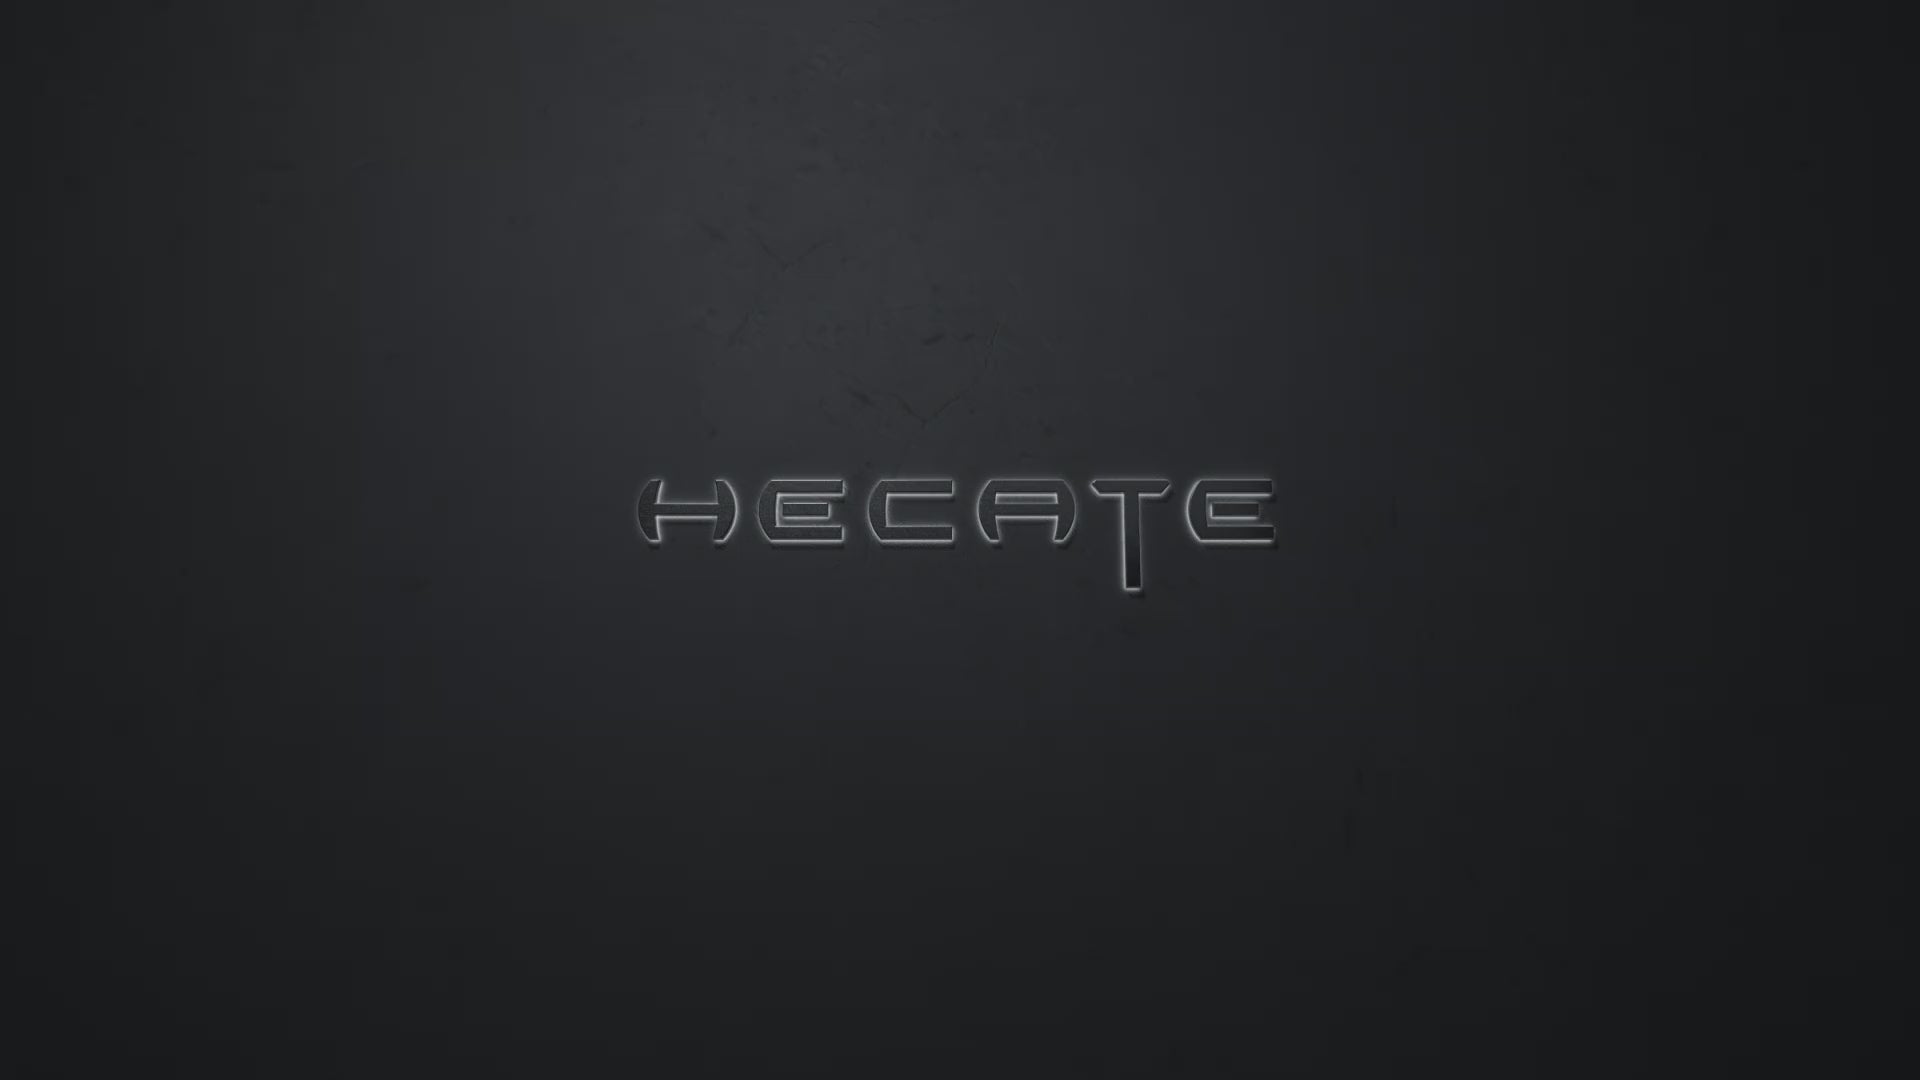 HECATE G2000 Video